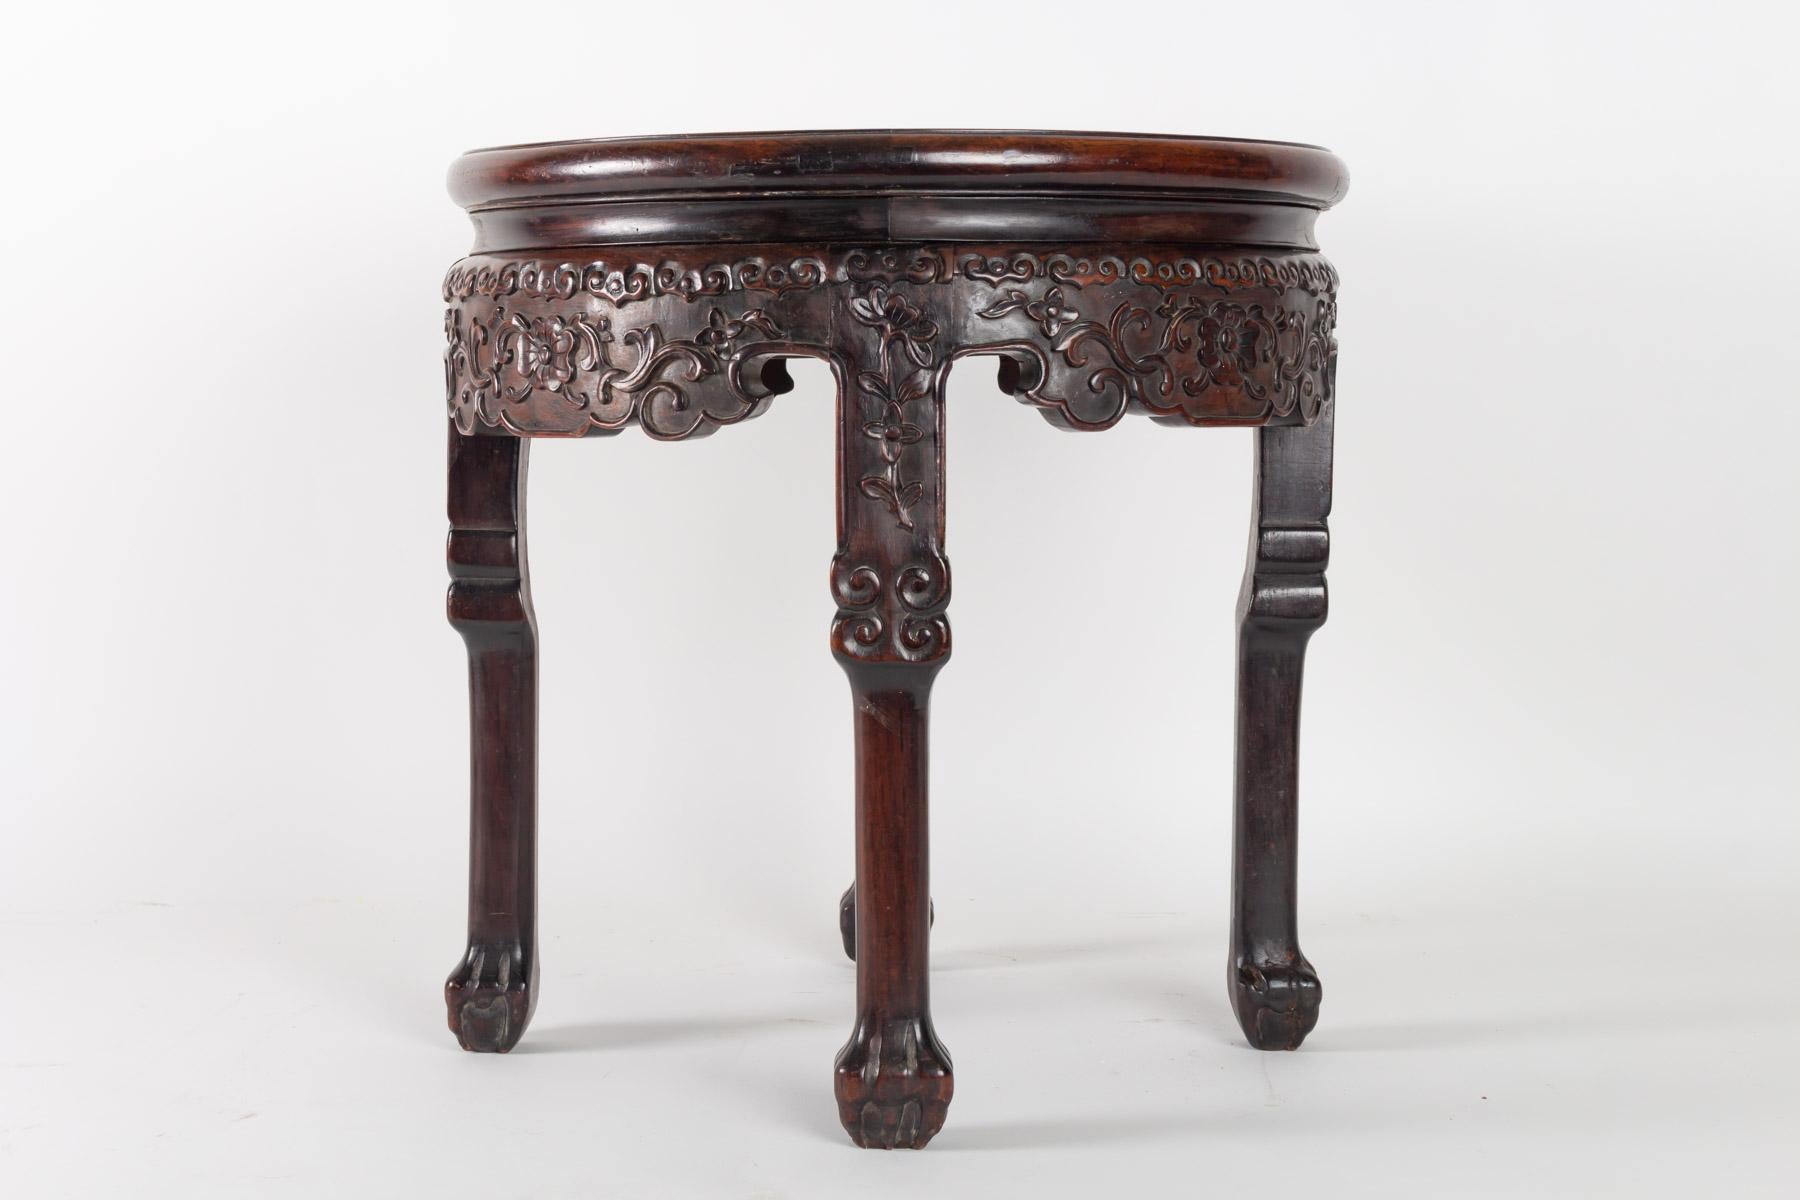 19th Century Small Exotic Wooden Table Very Dense Carved with Floral Patterns, China